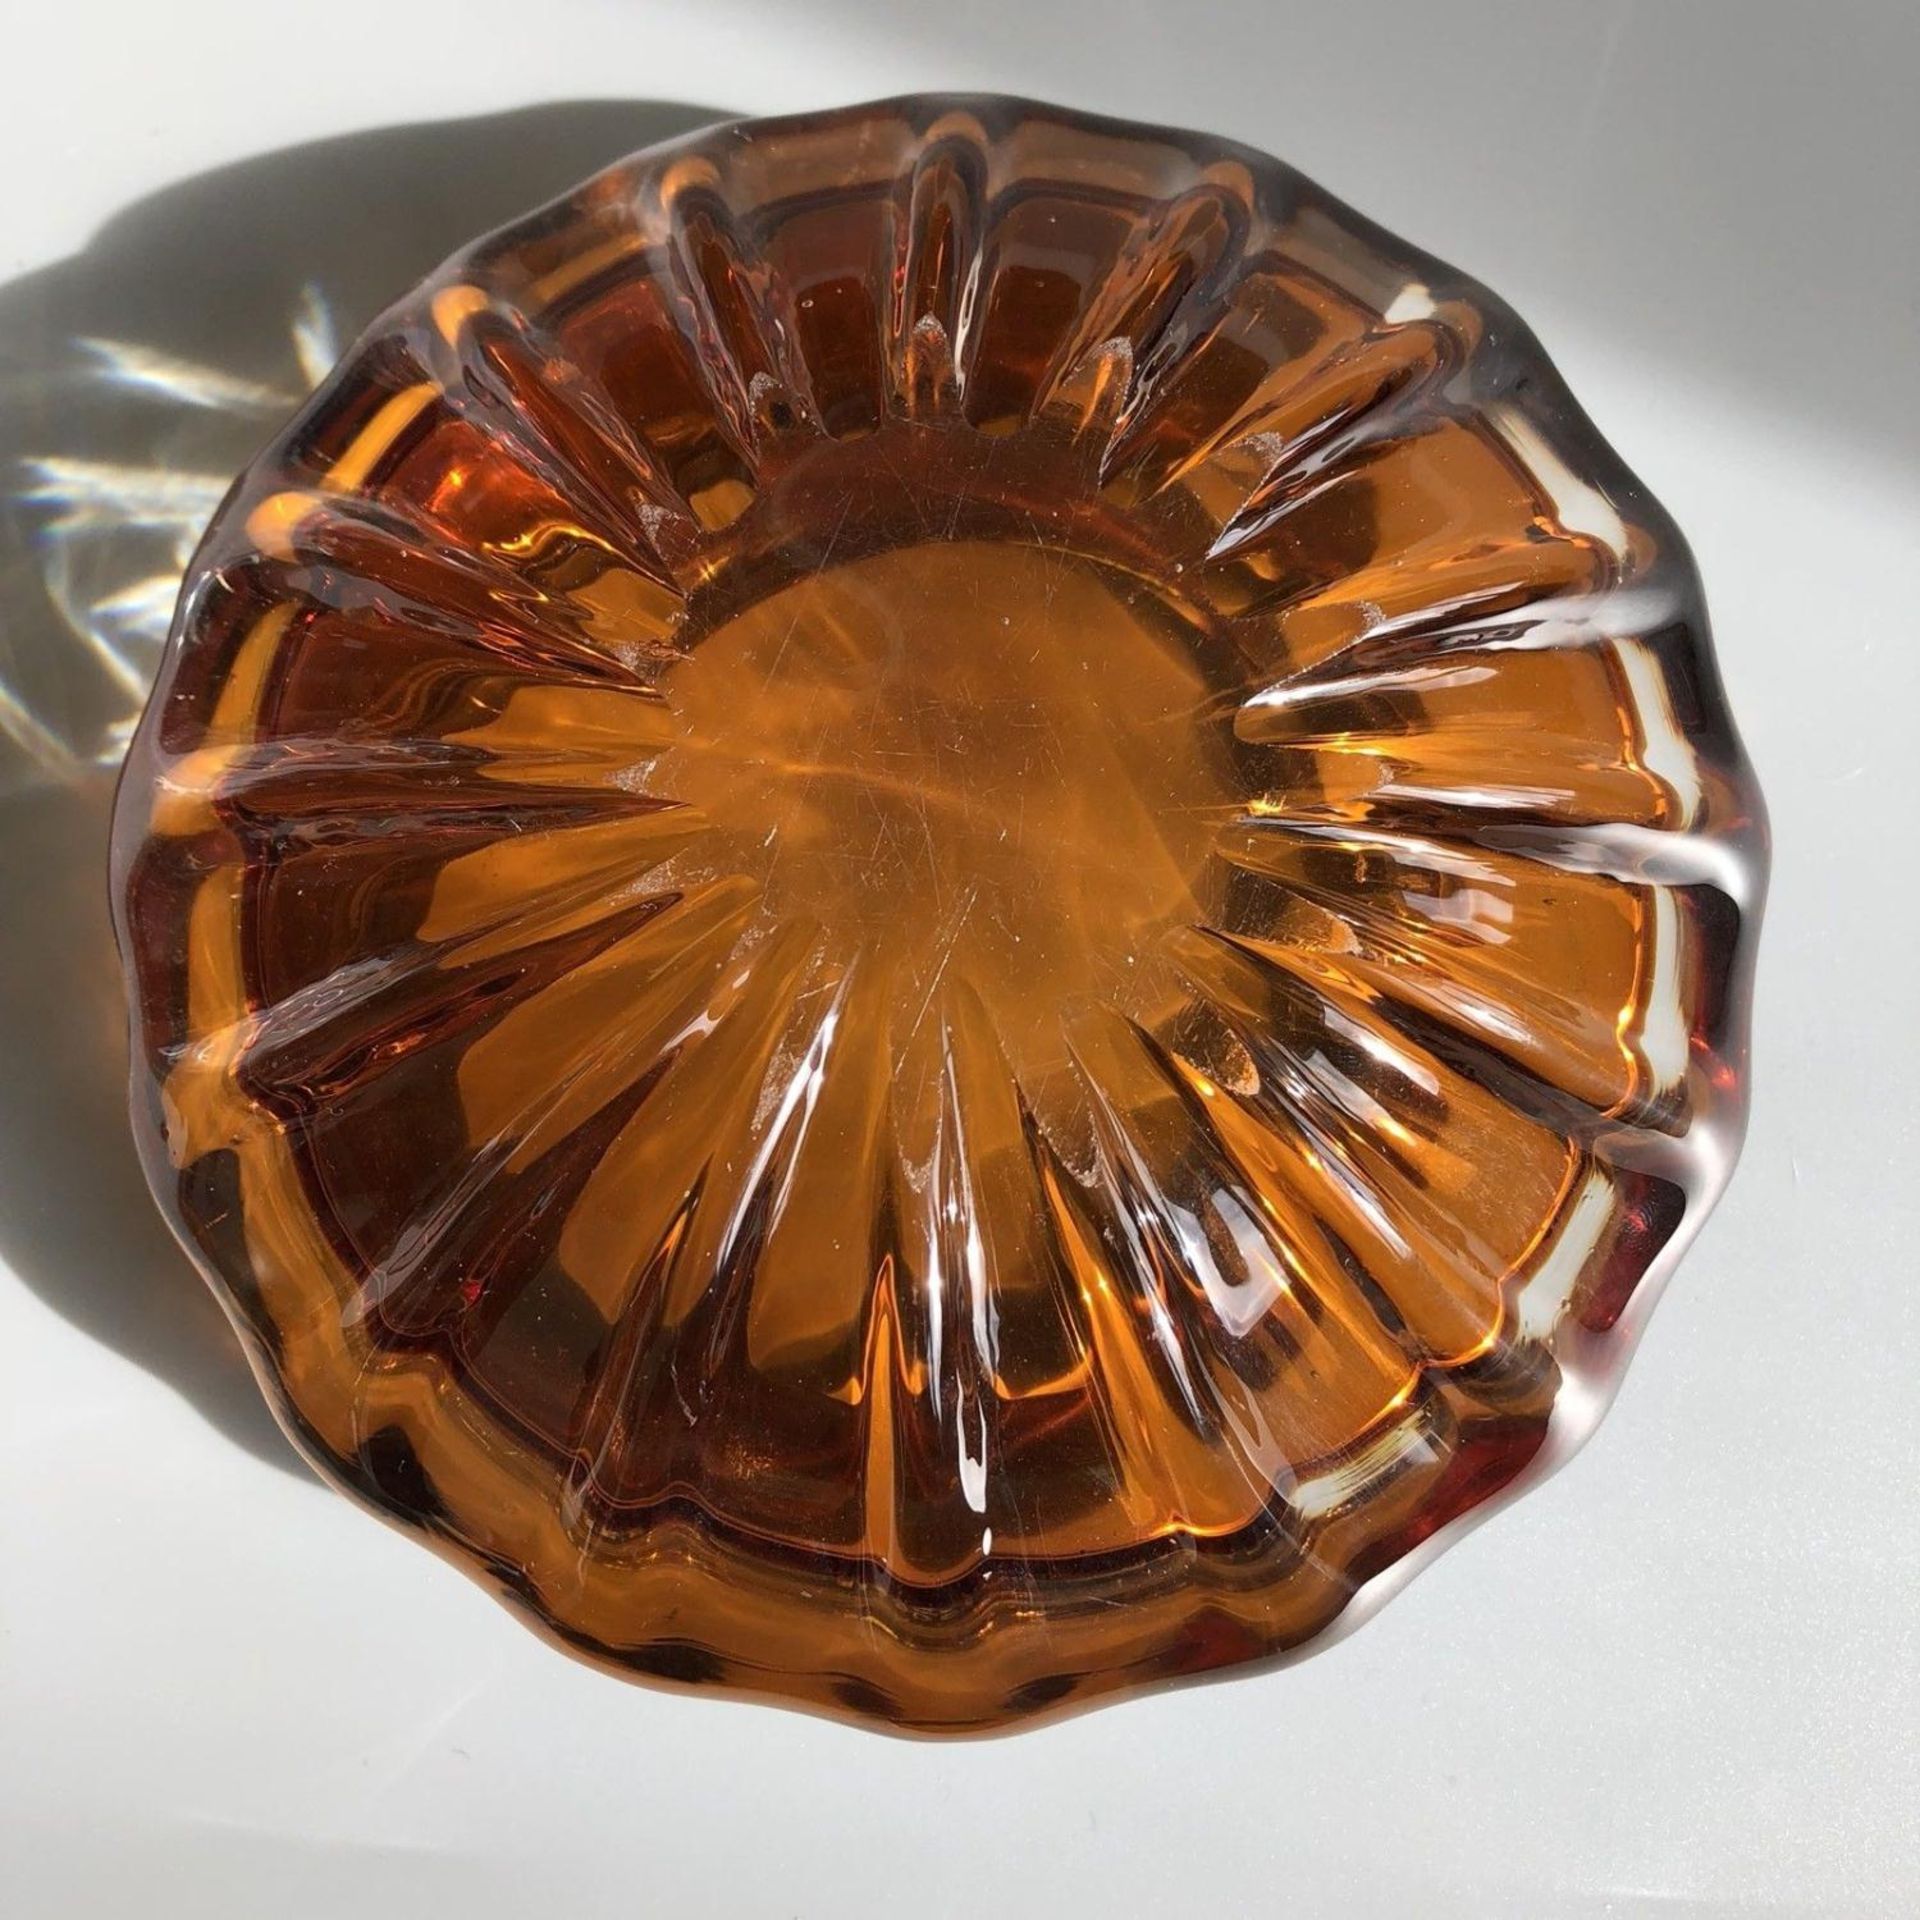 Good Quality Heavy Orange Amber Coloured Studio Glass 6 inch Bowl 1960s or 1970s - Image 2 of 2